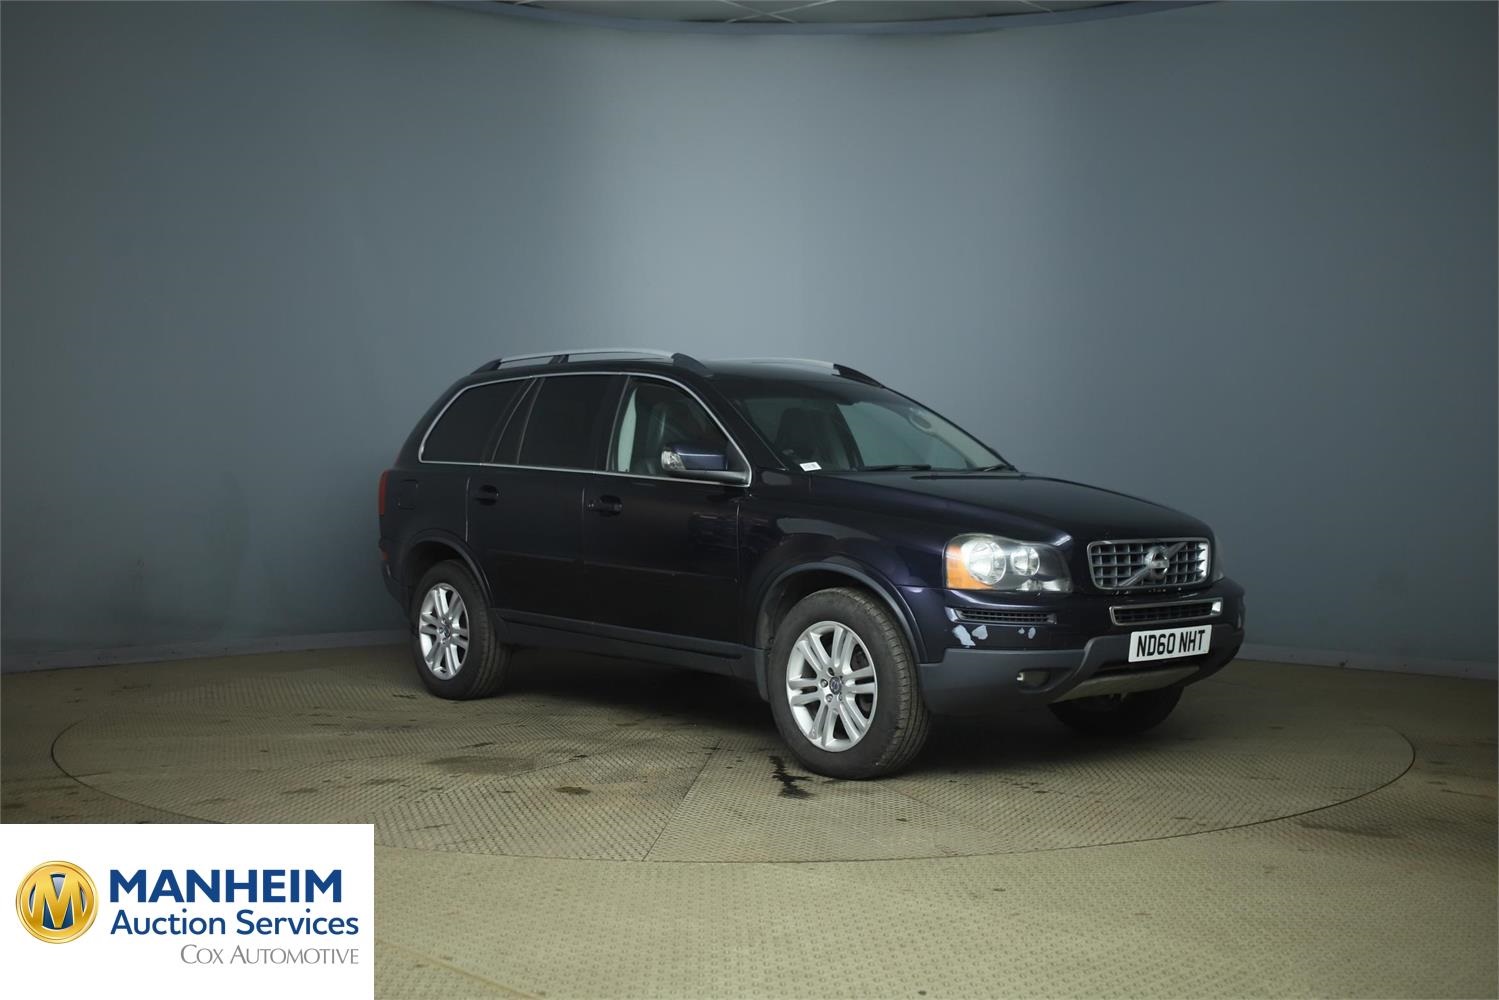 VOLVO
XC90
2.4 D5 [200] SE 5dr Geartronic